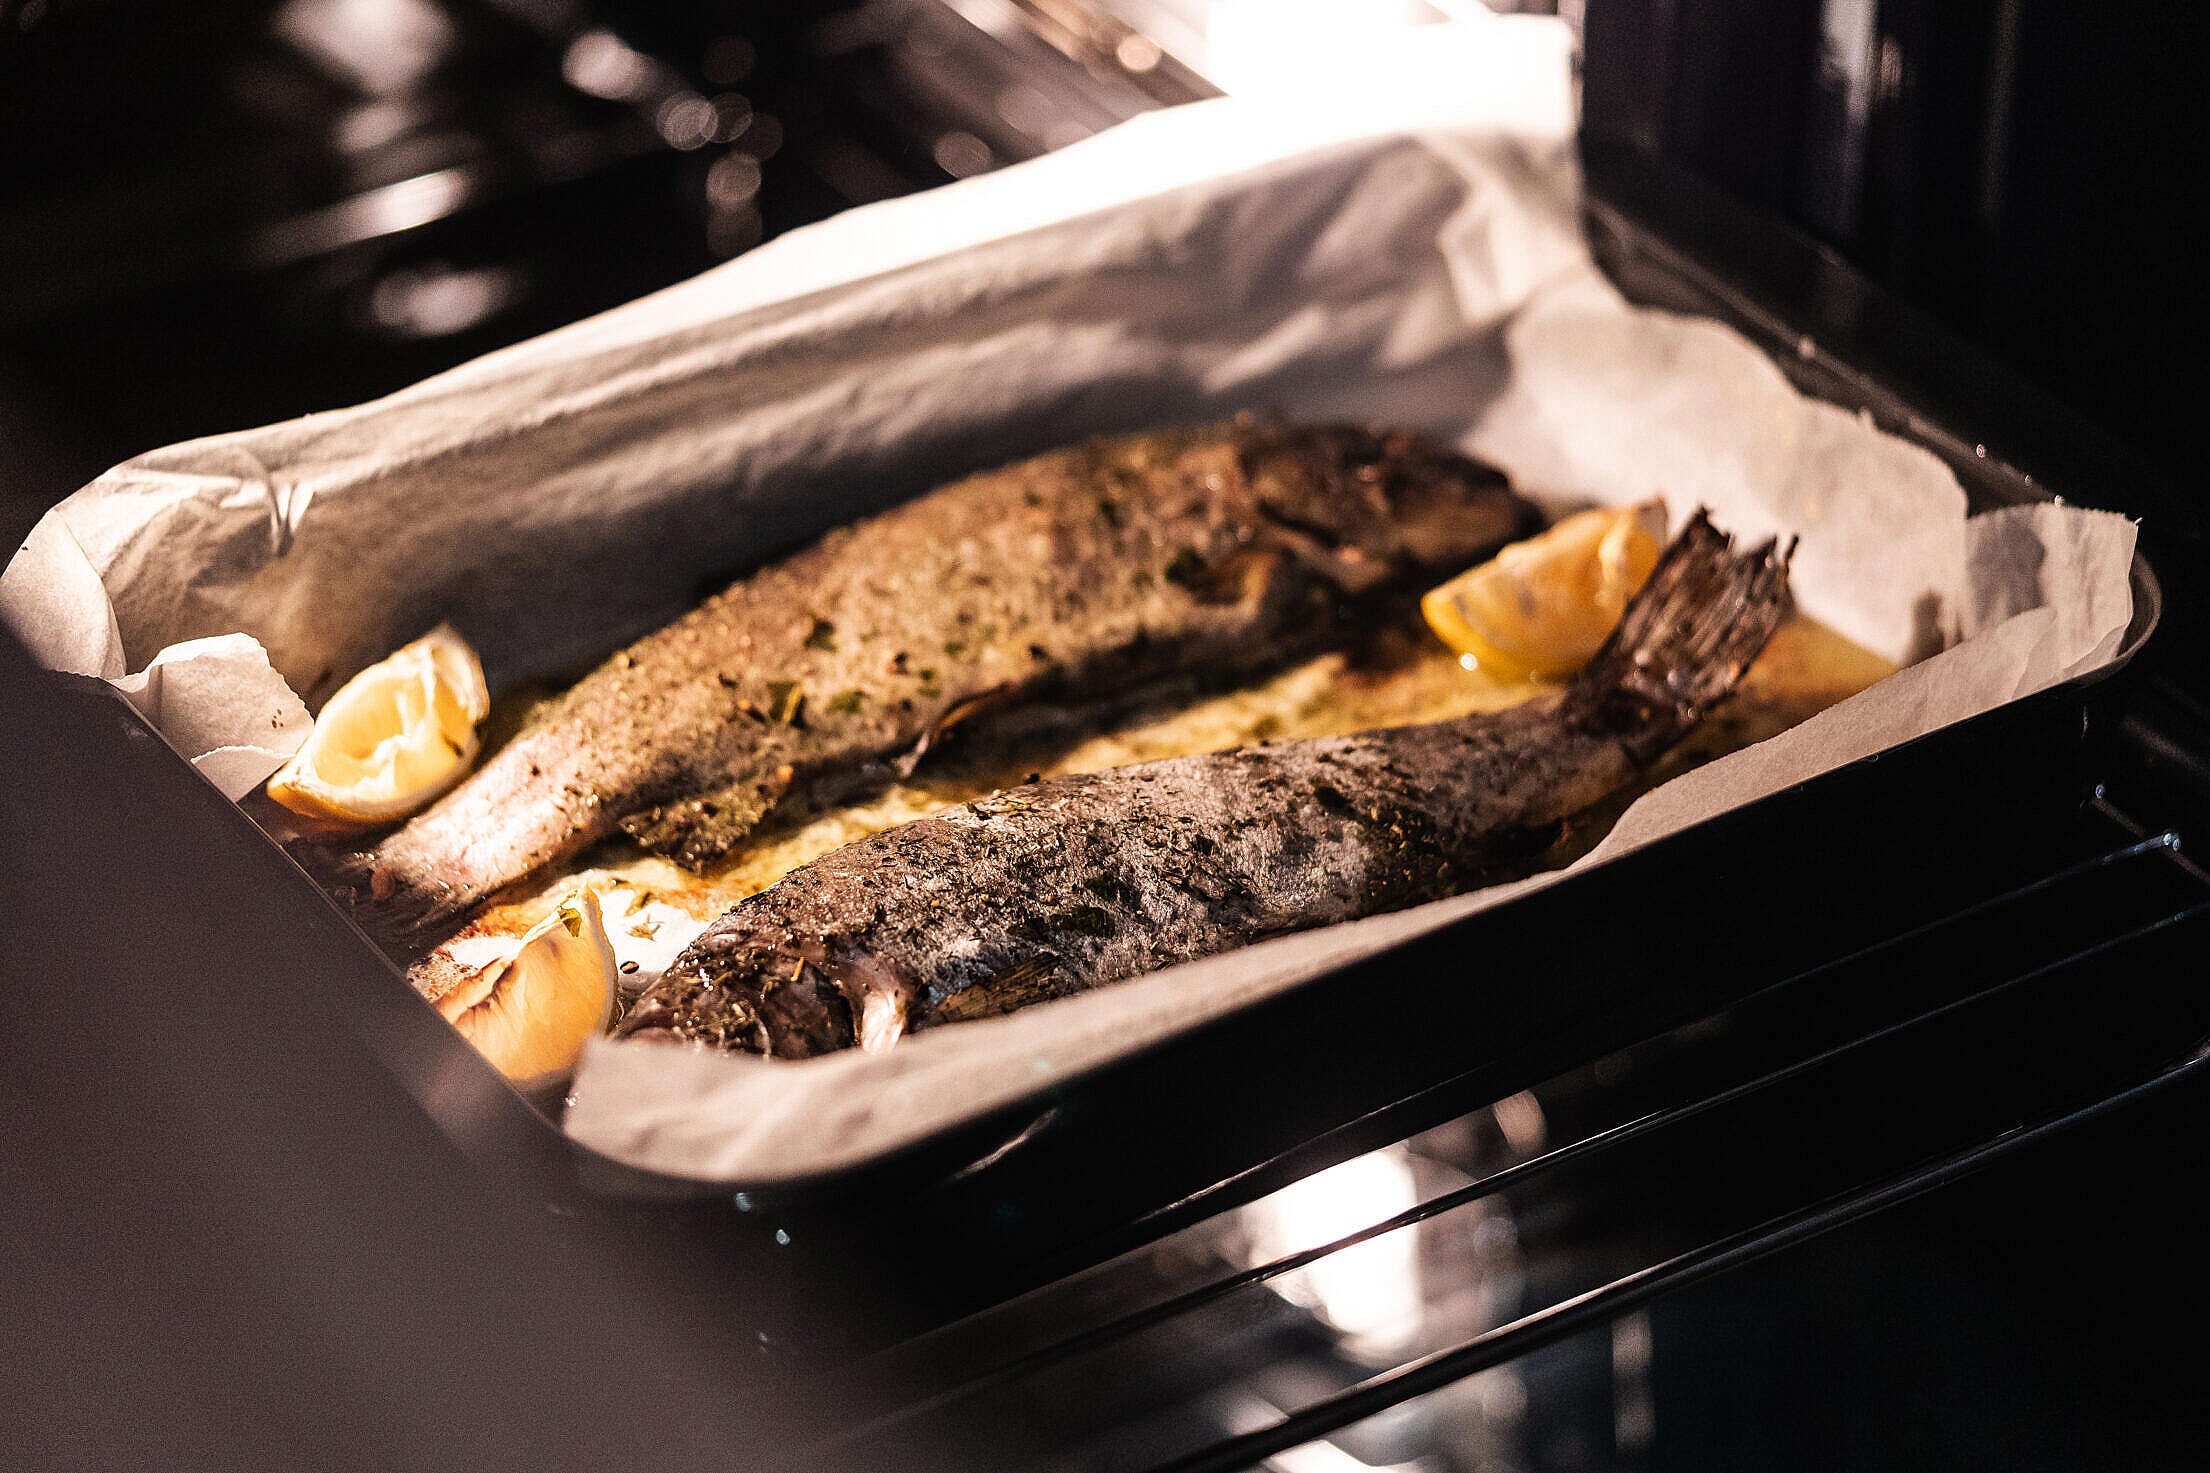 Whole Trout on a Baking Tray Free Stock Photo